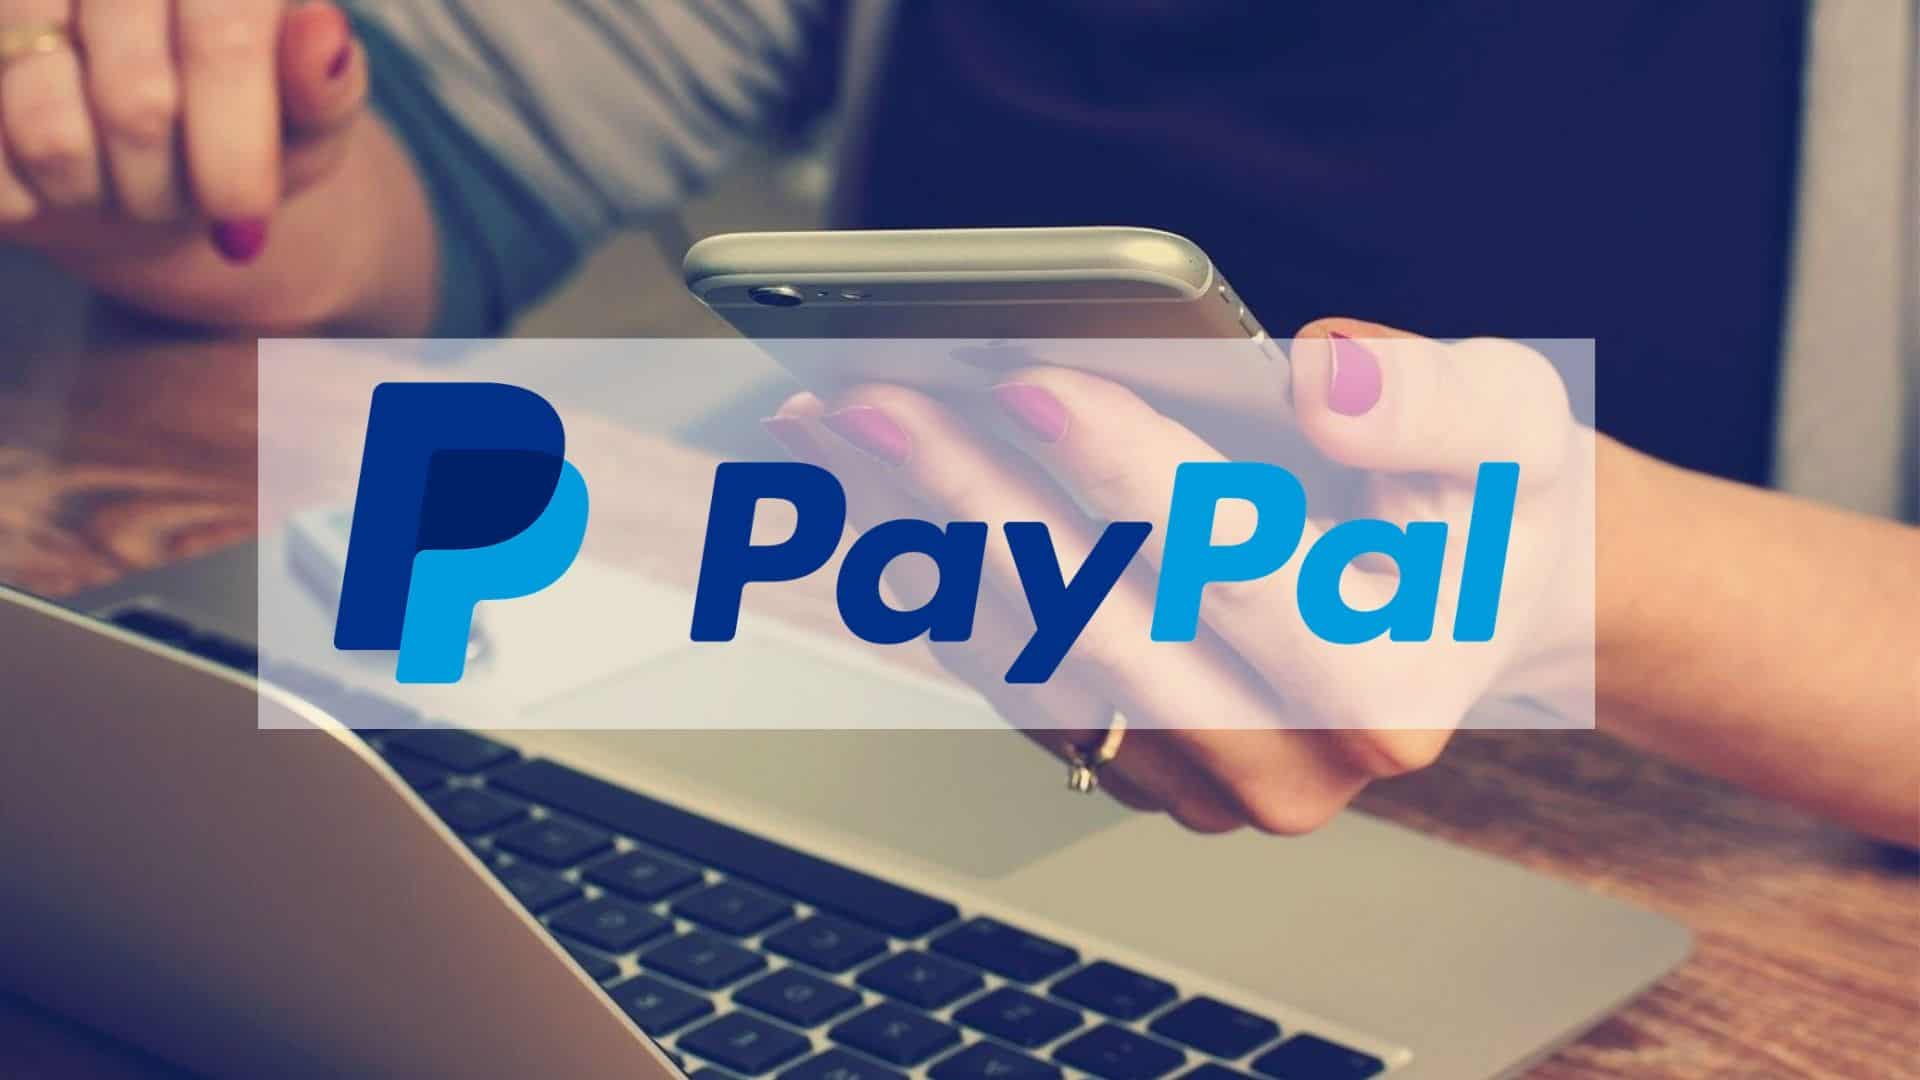 Paypal Wallpapers